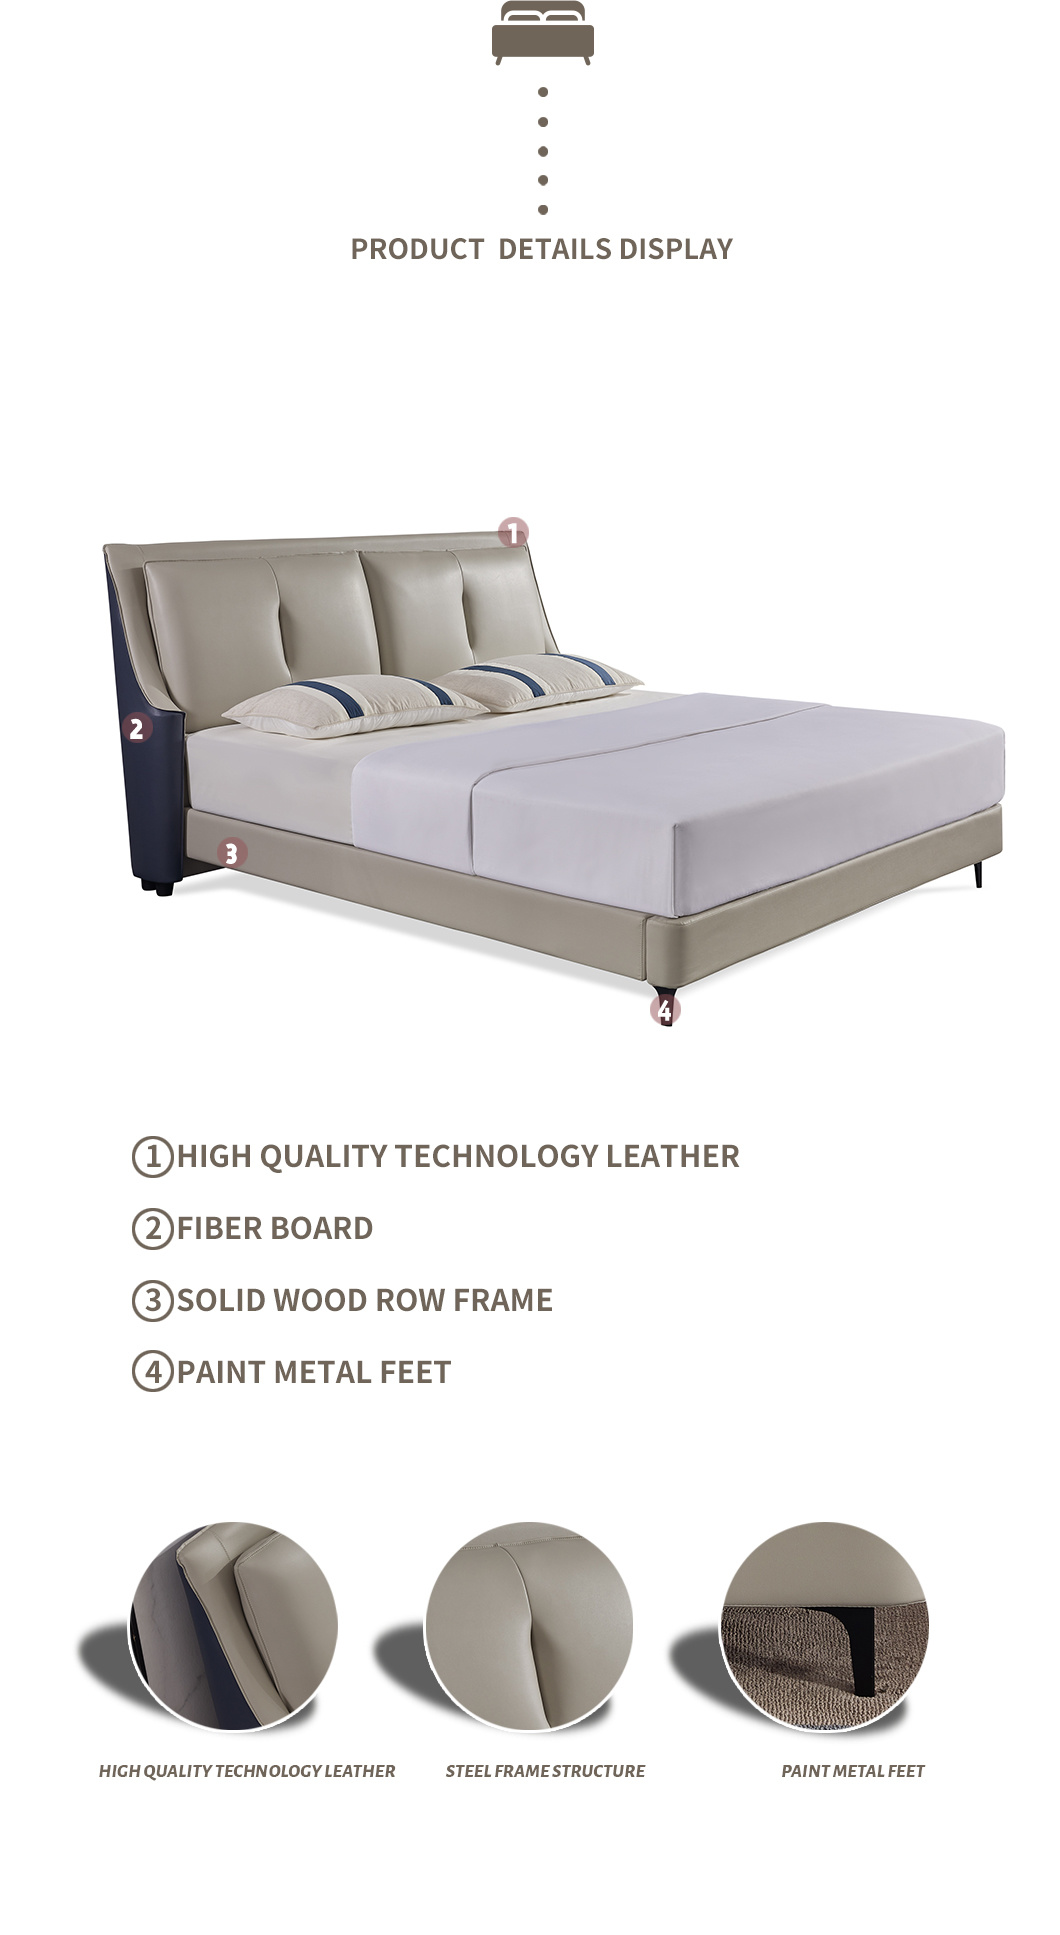 China Factory High Quality Technology Leather Bedroom King Bed